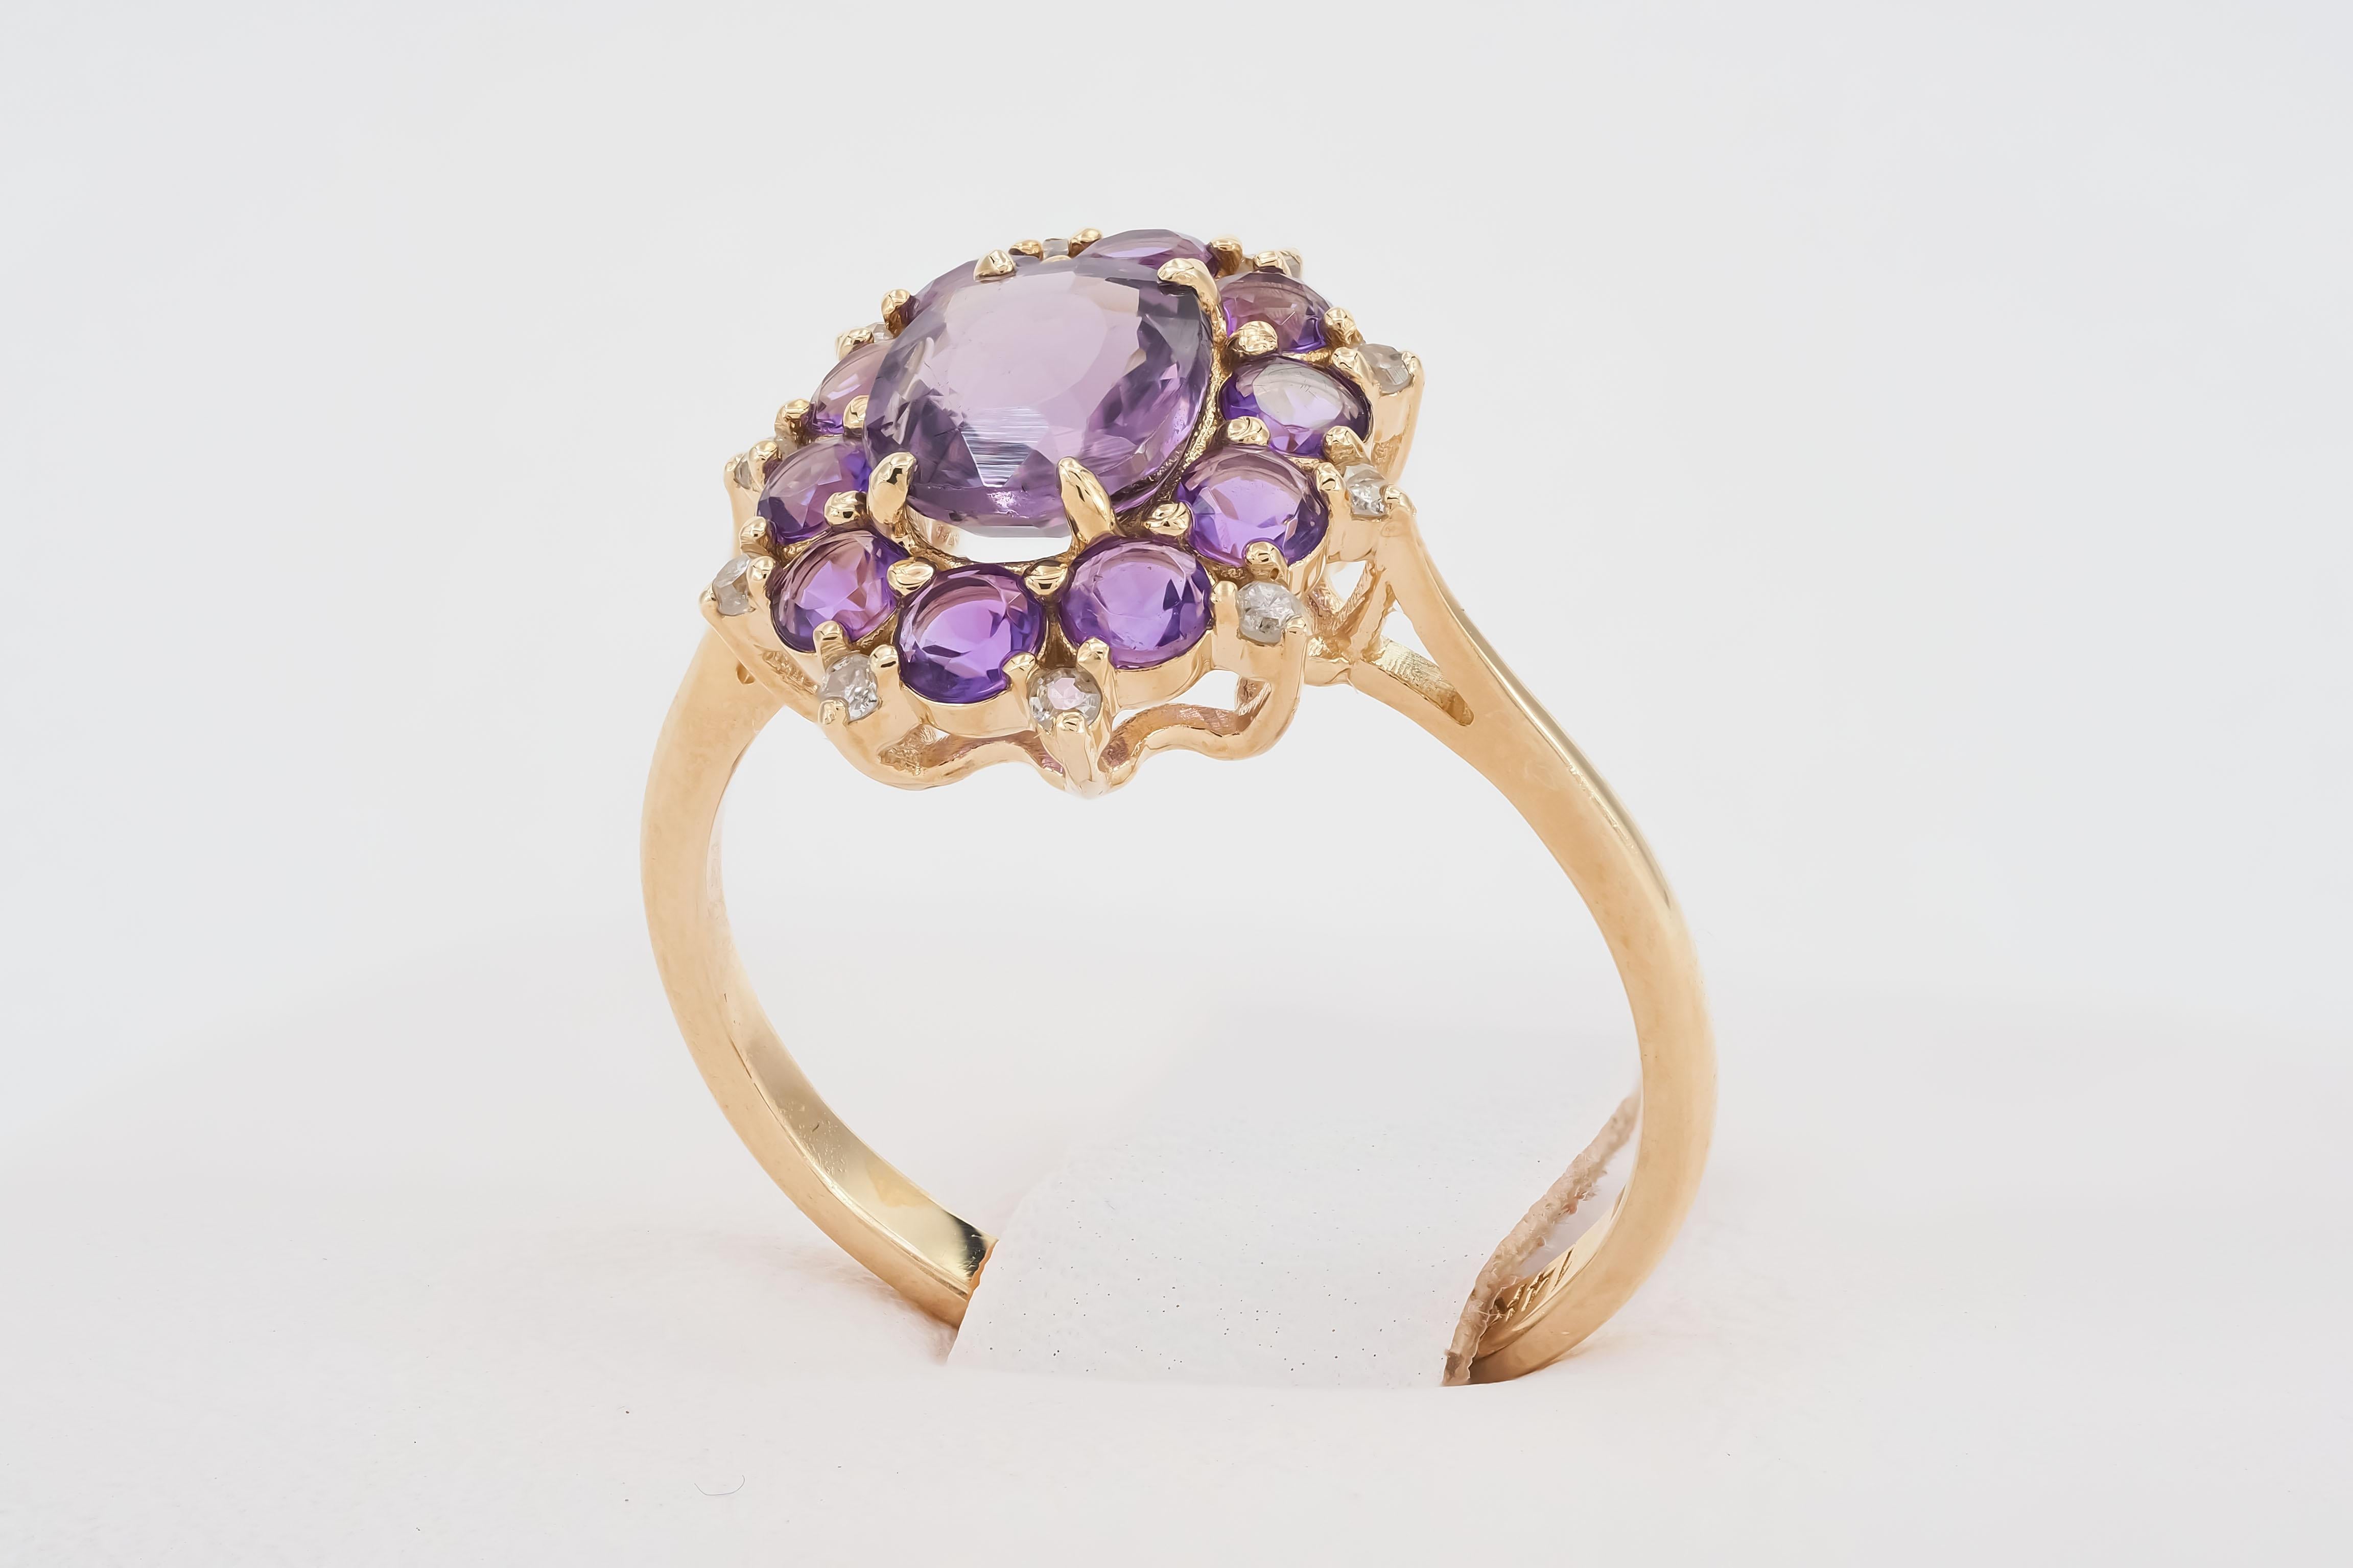 Lavender Spinel Gold Ring, 14k Gold Ring with Spinel, Amethyst and Diamonds 1